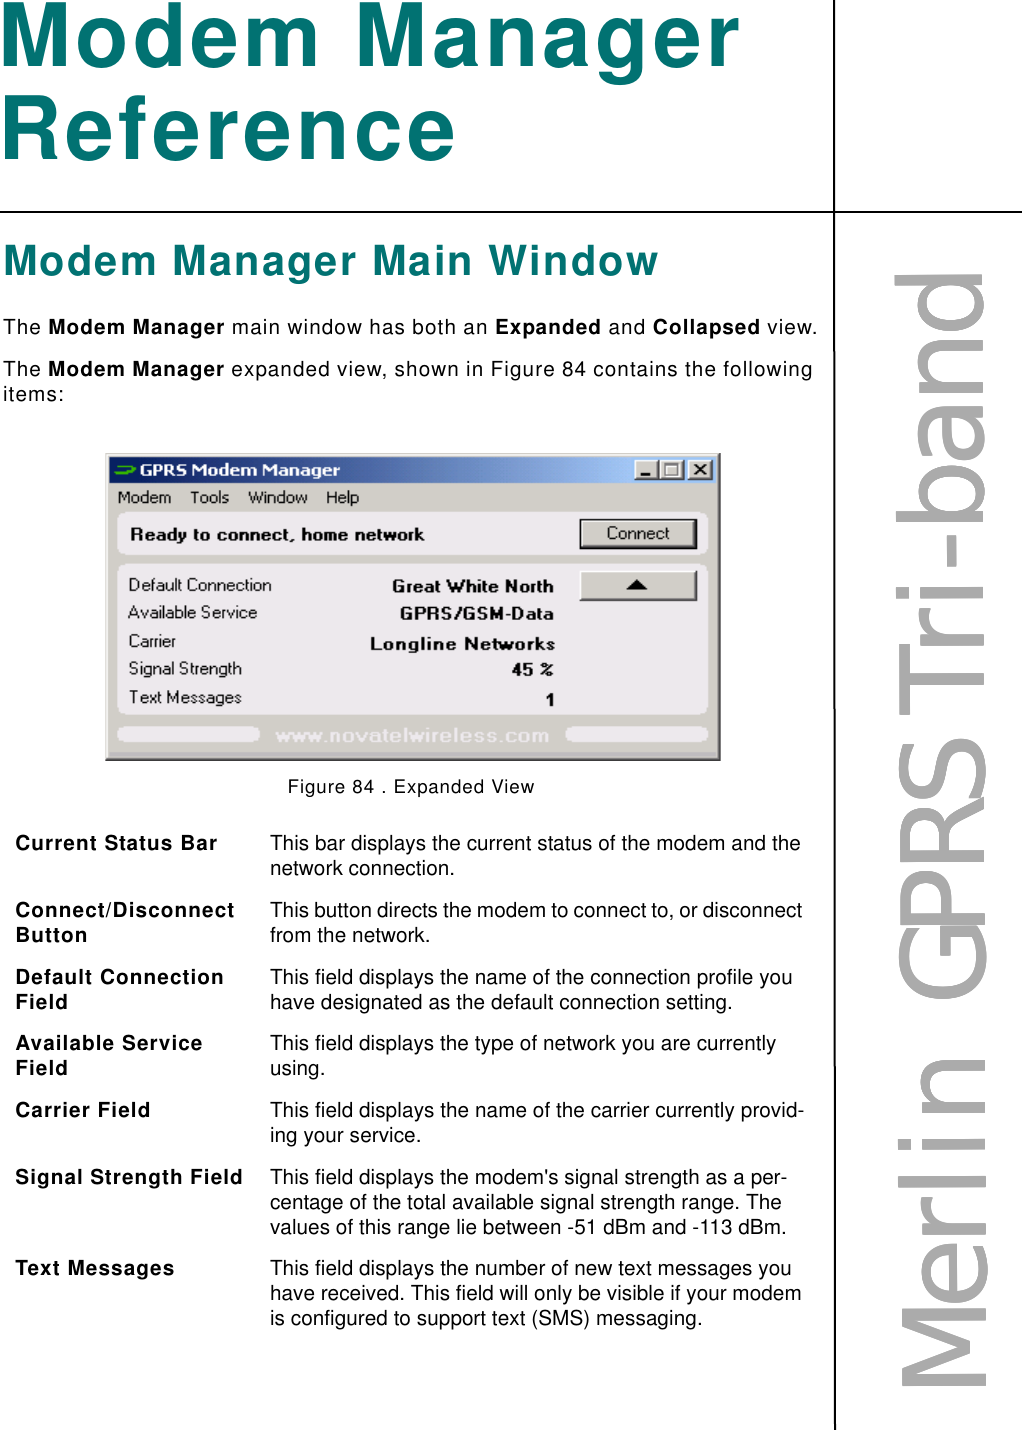 MMMMeeeerrrrlllliiiinnnn        GGGGPPPPRRRRSSSS    TTTTrrrriiii----bbbbaaaannnnddddModem Manager ReferenceModem Manager Main WindowThe Modem Manager main window has both an Expanded and Collapsed view.The Modem Manager expanded view, shown in Figure 84 contains the following items:Figure 84 . Expanded ViewCurrent Status Bar This bar displays the current status of the modem and the network connection. Connect/Disconnect Button This button directs the modem to connect to, or disconnect from the network.Default Connection Field This field displays the name of the connection profile you have designated as the default connection setting. Available Service Field This field displays the type of network you are currently using. Carrier Field This field displays the name of the carrier currently provid-ing your service. Signal Strength Field This field displays the modem&apos;s signal strength as a per-centage of the total available signal strength range. The values of this range lie between -51 dBm and -113 dBm.Text Messages This field displays the number of new text messages you have received. This field will only be visible if your modem is configured to support text (SMS) messaging.